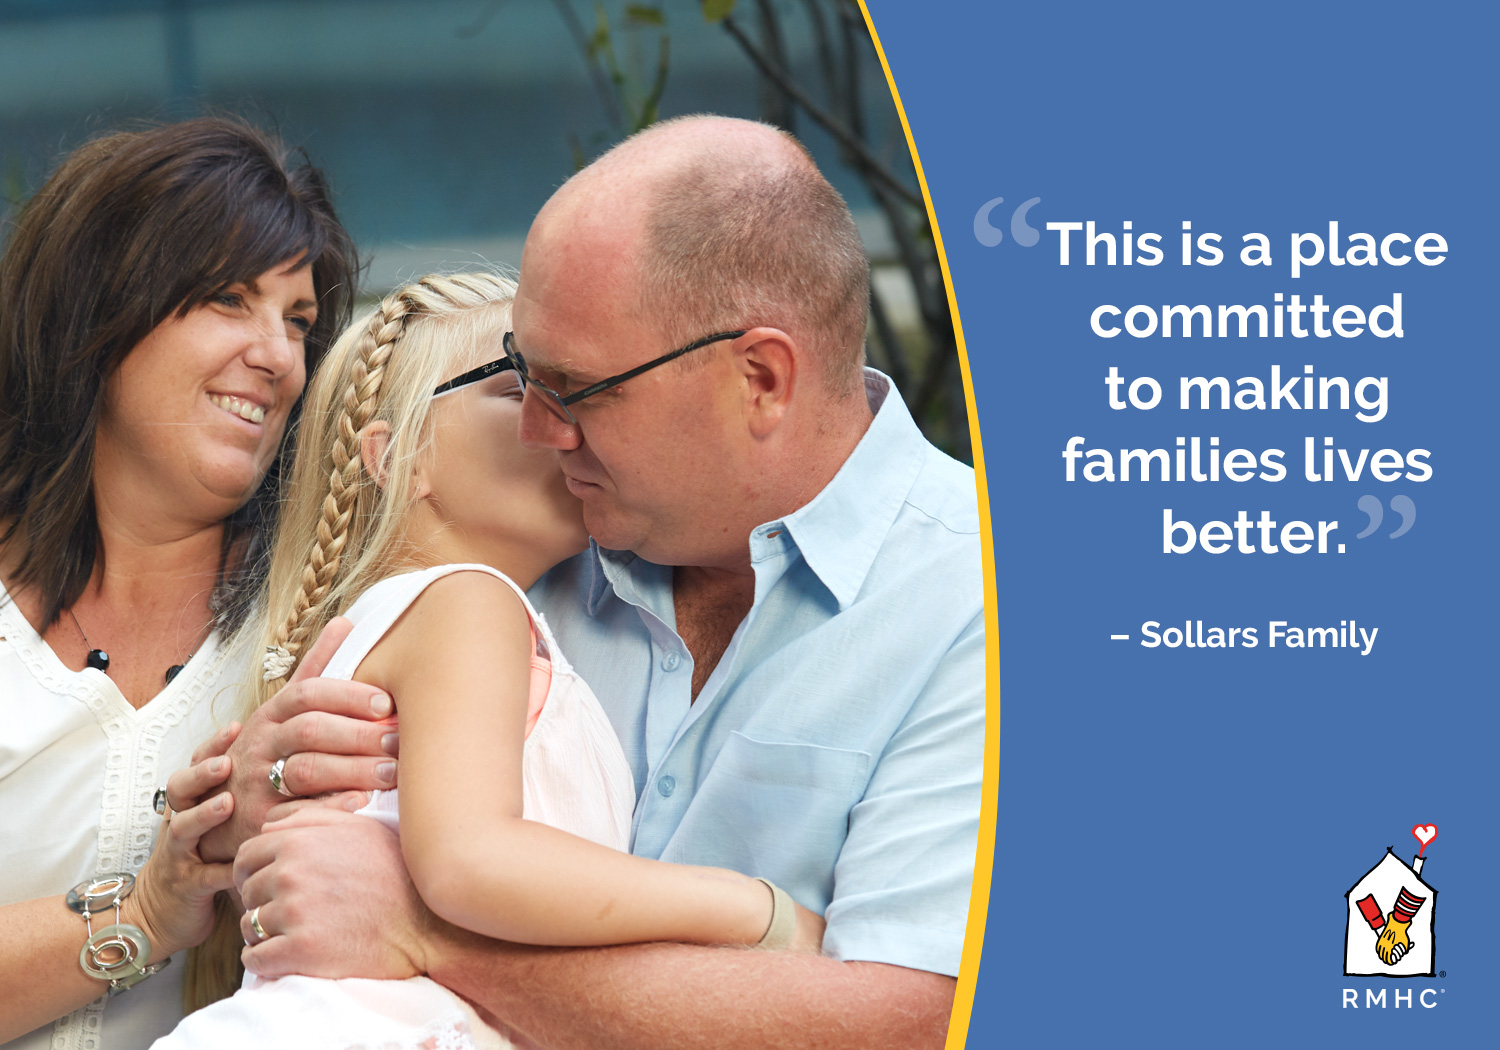 The Sollars family photo and Quote: This is a place committed to making families lives better